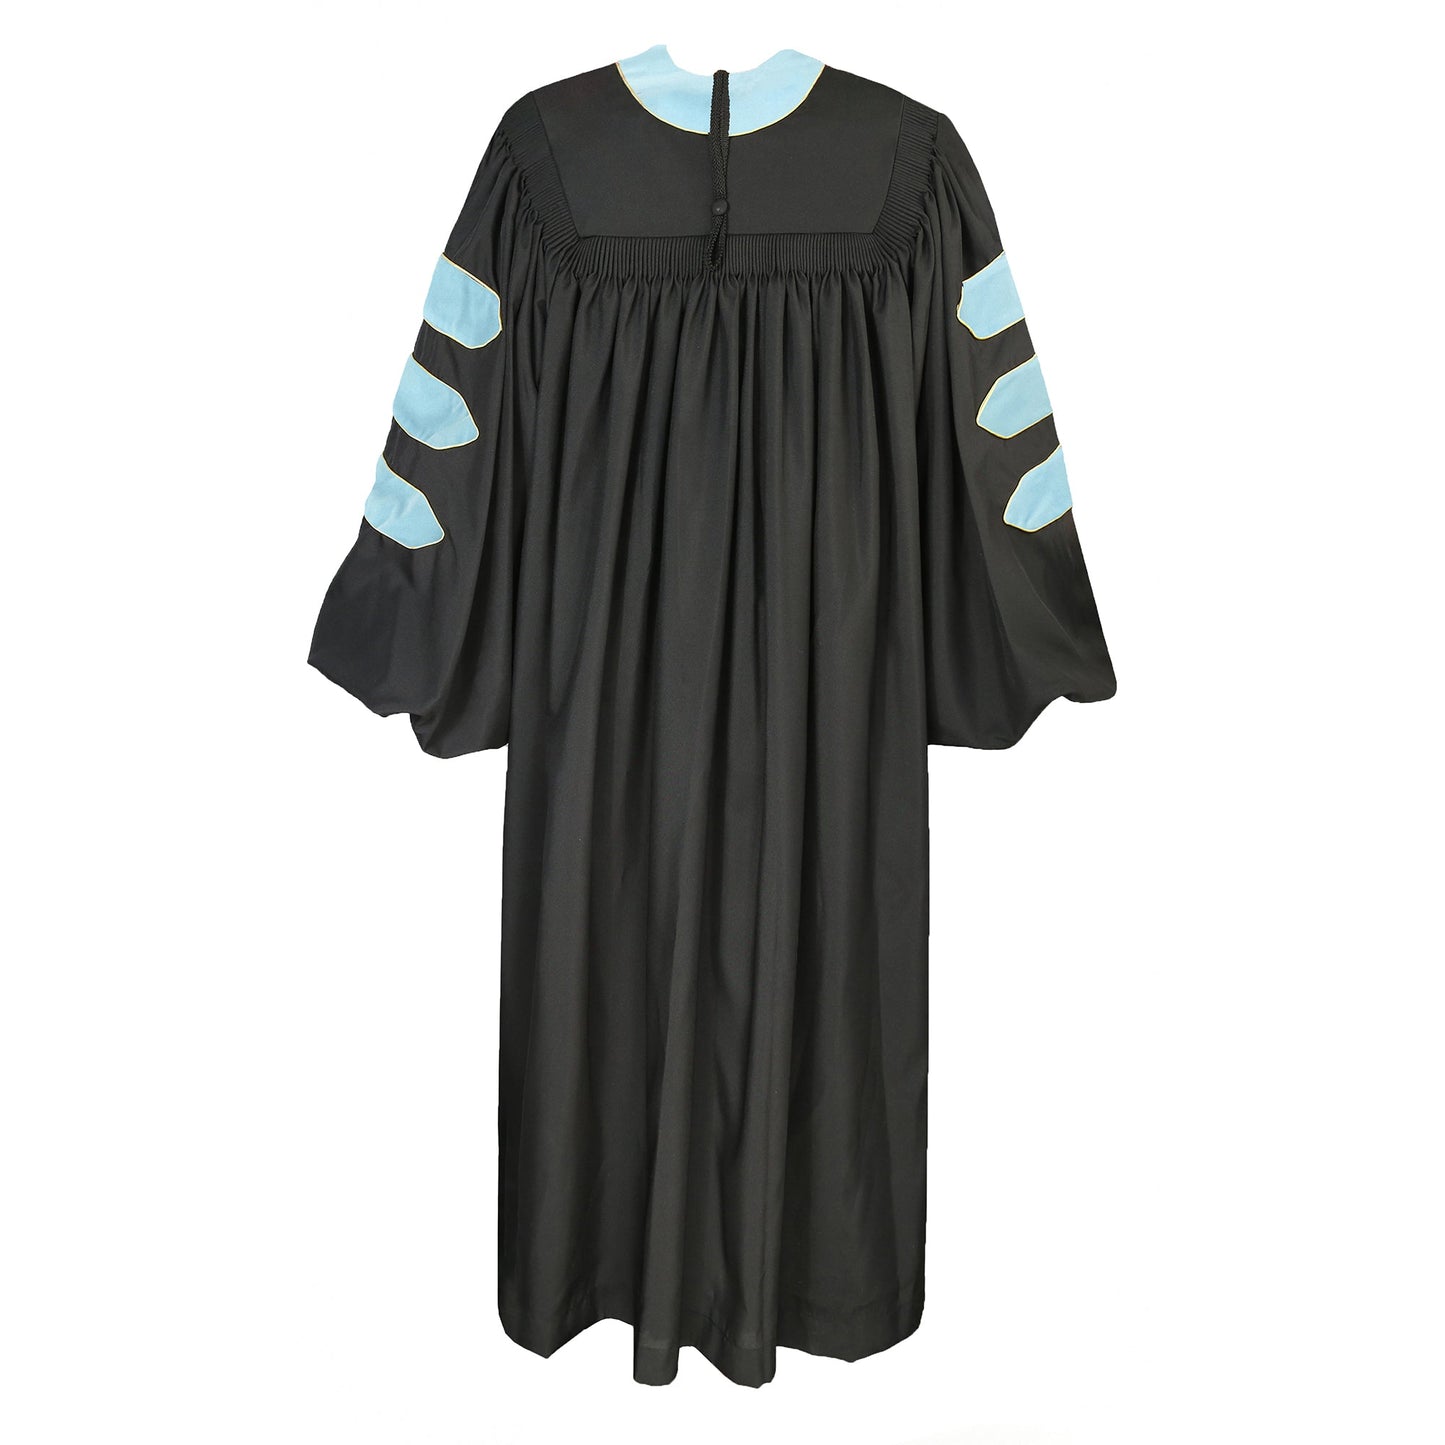 Deluxe Doctoral Graduation Gown/Doctoral Tam Package Rich in Color & Size-CA graduation